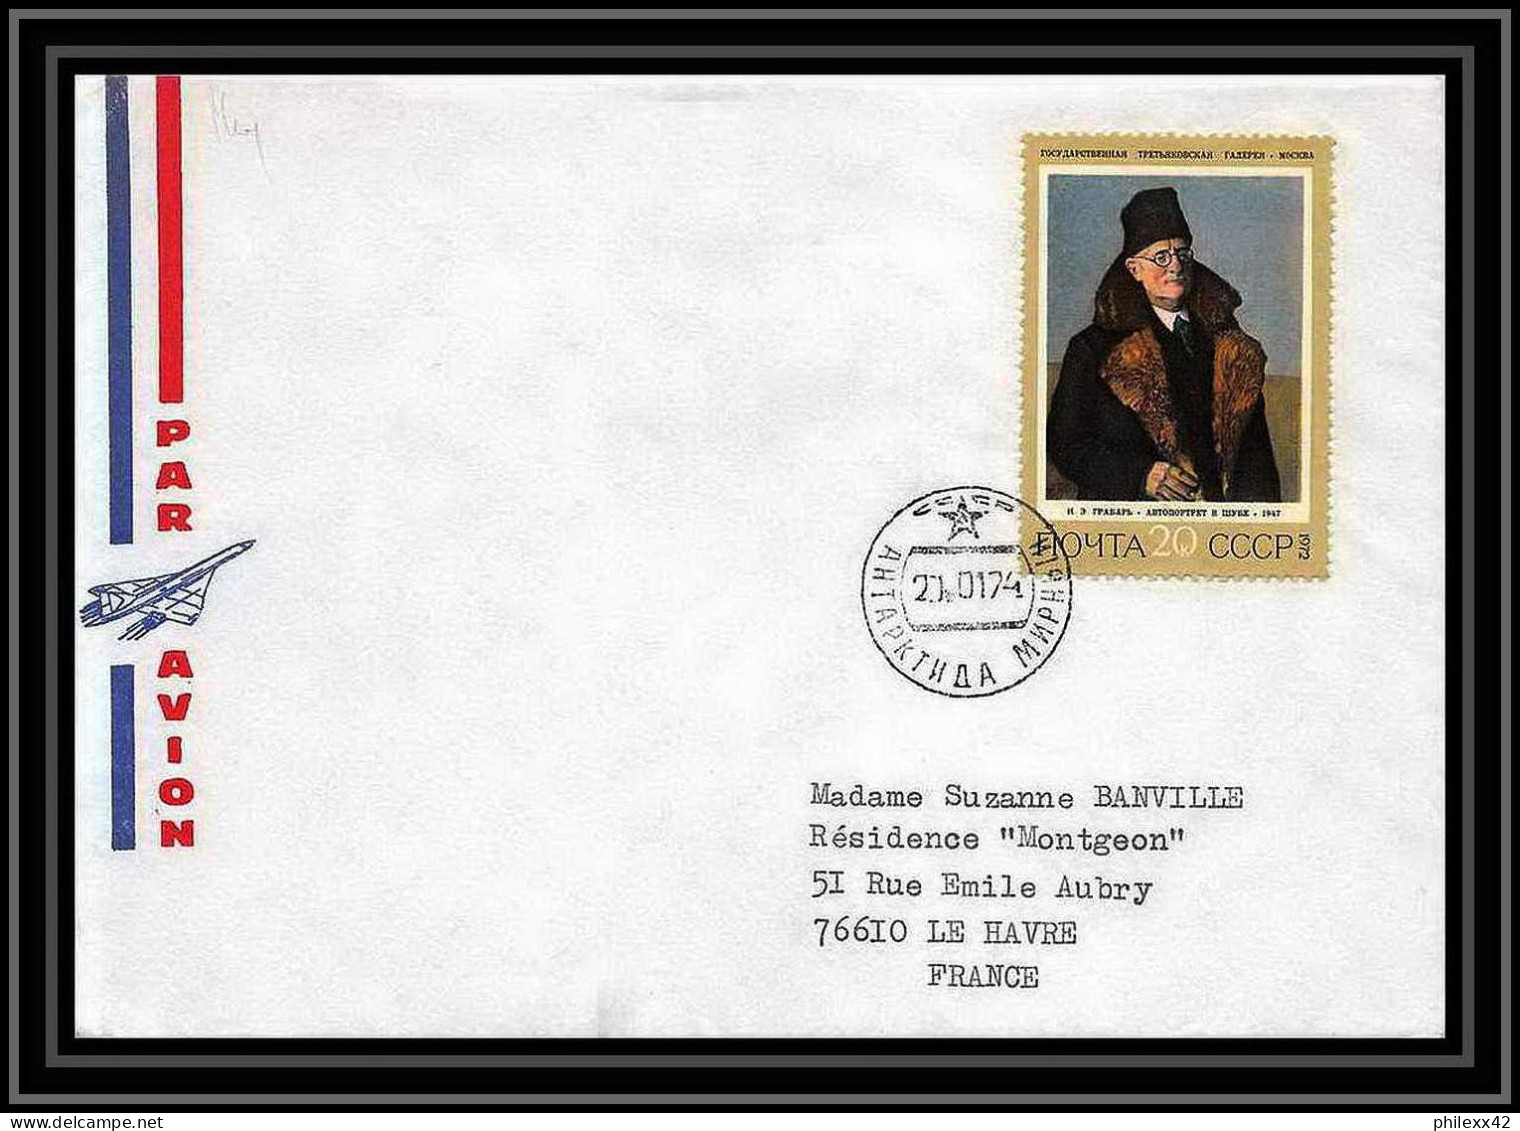 2035 Antarctic Russie (Russia Urss USSR) Lettre (cover) 27/01/1974 - Bases Antarctiques